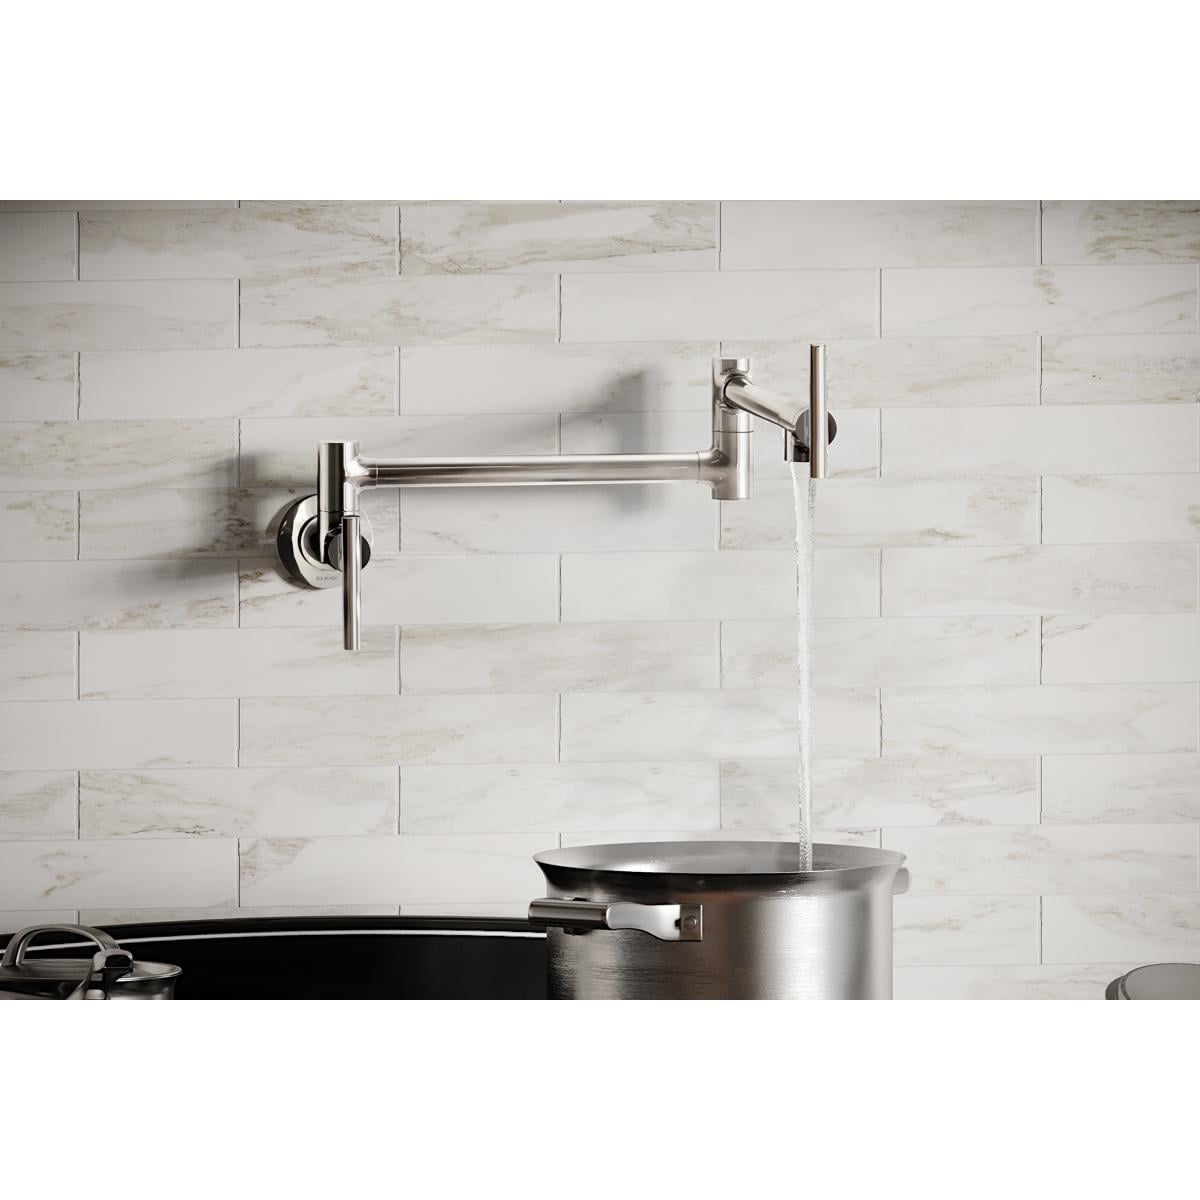 Elkay Avado Wall Mount Single Hole Pot Filler Kitchen Faucet with Lever  Handles Chrome On Sale Bed Bath  Beyond 30349514